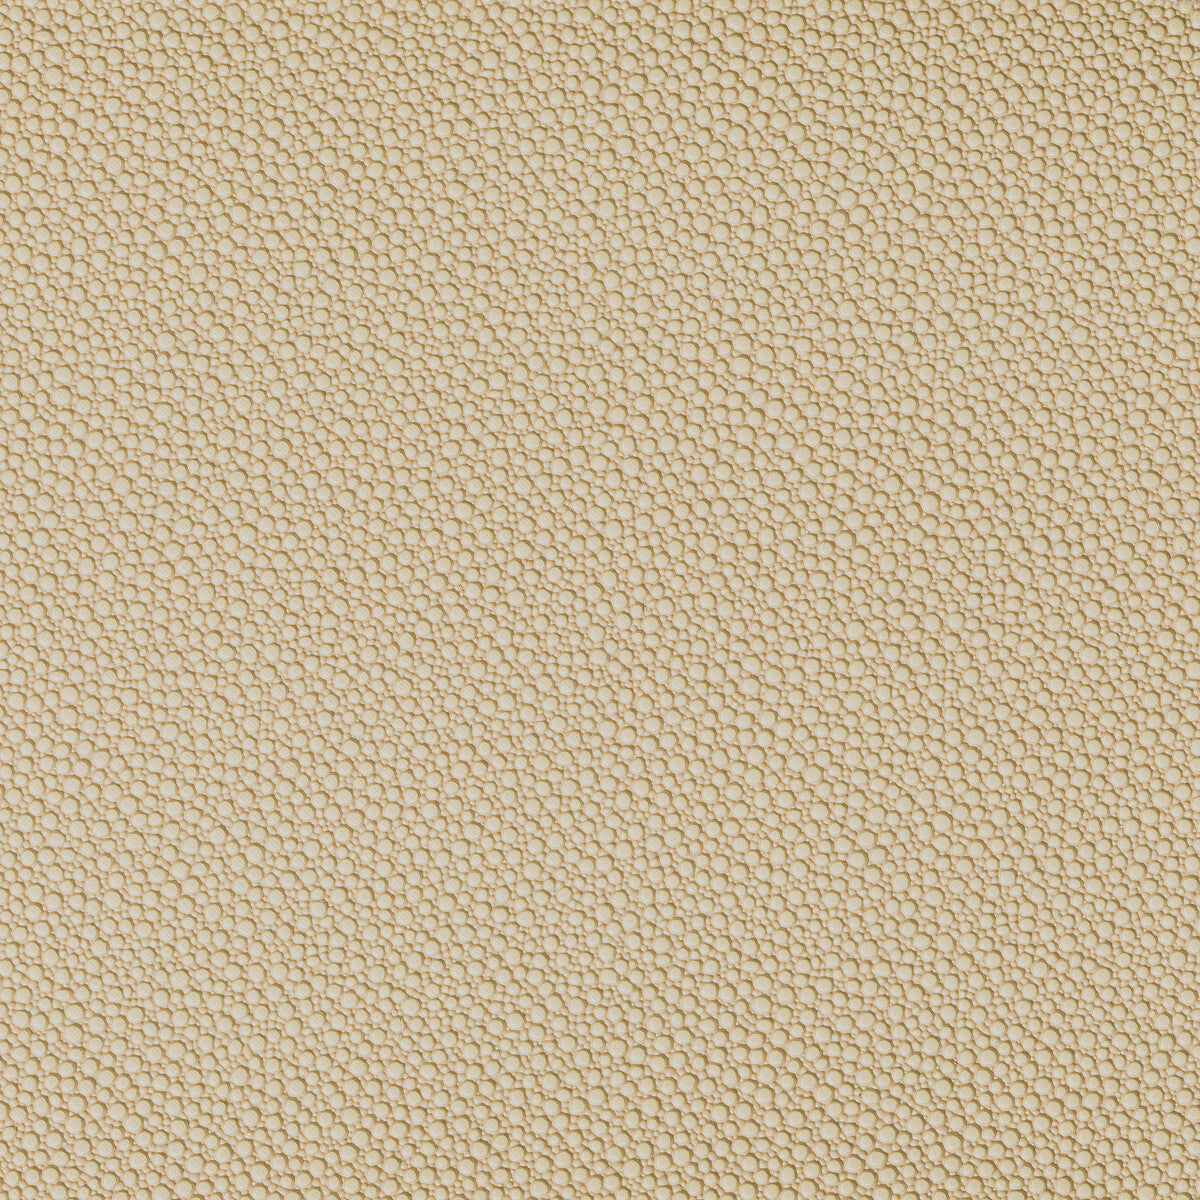 Fetch fabric in sandbar color - pattern FETCH.1606.0 - by Kravet Contract in the Foundations / Value collection